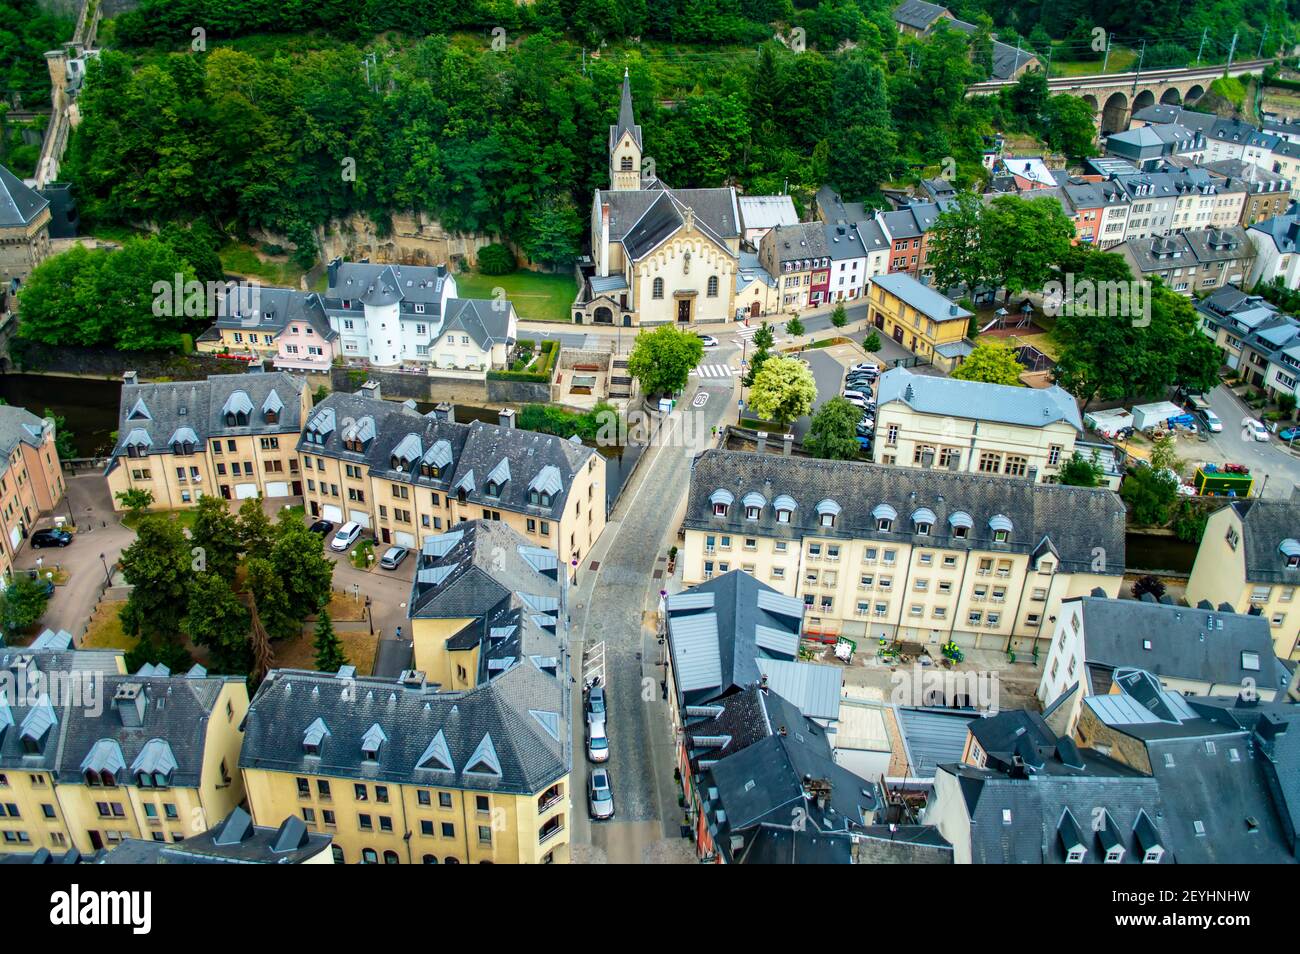 Luxembourg city, Luxembourg - July 15, 2019: Aerial view of houses with grey roofs in the Old Town of Luxembourg city Stock Photo